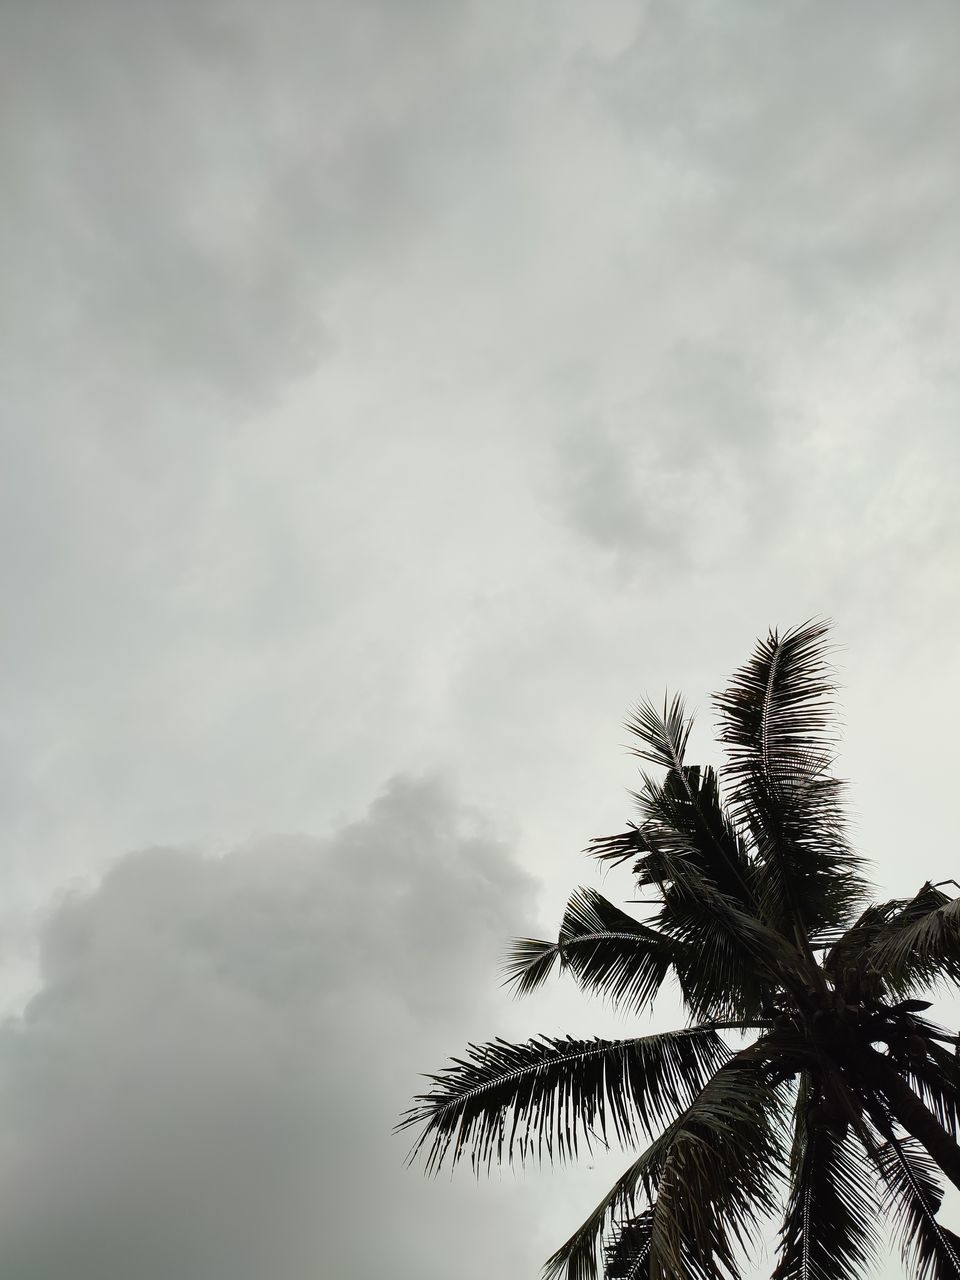 palm tree, tropical climate, sky, tree, cloud, plant, nature, low angle view, wind, beauty in nature, no people, palm leaf, tropical tree, leaf, coconut palm tree, outdoors, tranquility, scenics - nature, copy space, environment, cloudscape, growth, day, silhouette, sunlight, travel destinations, dramatic sky, overcast, idyllic, land, tranquil scene, branch, travel